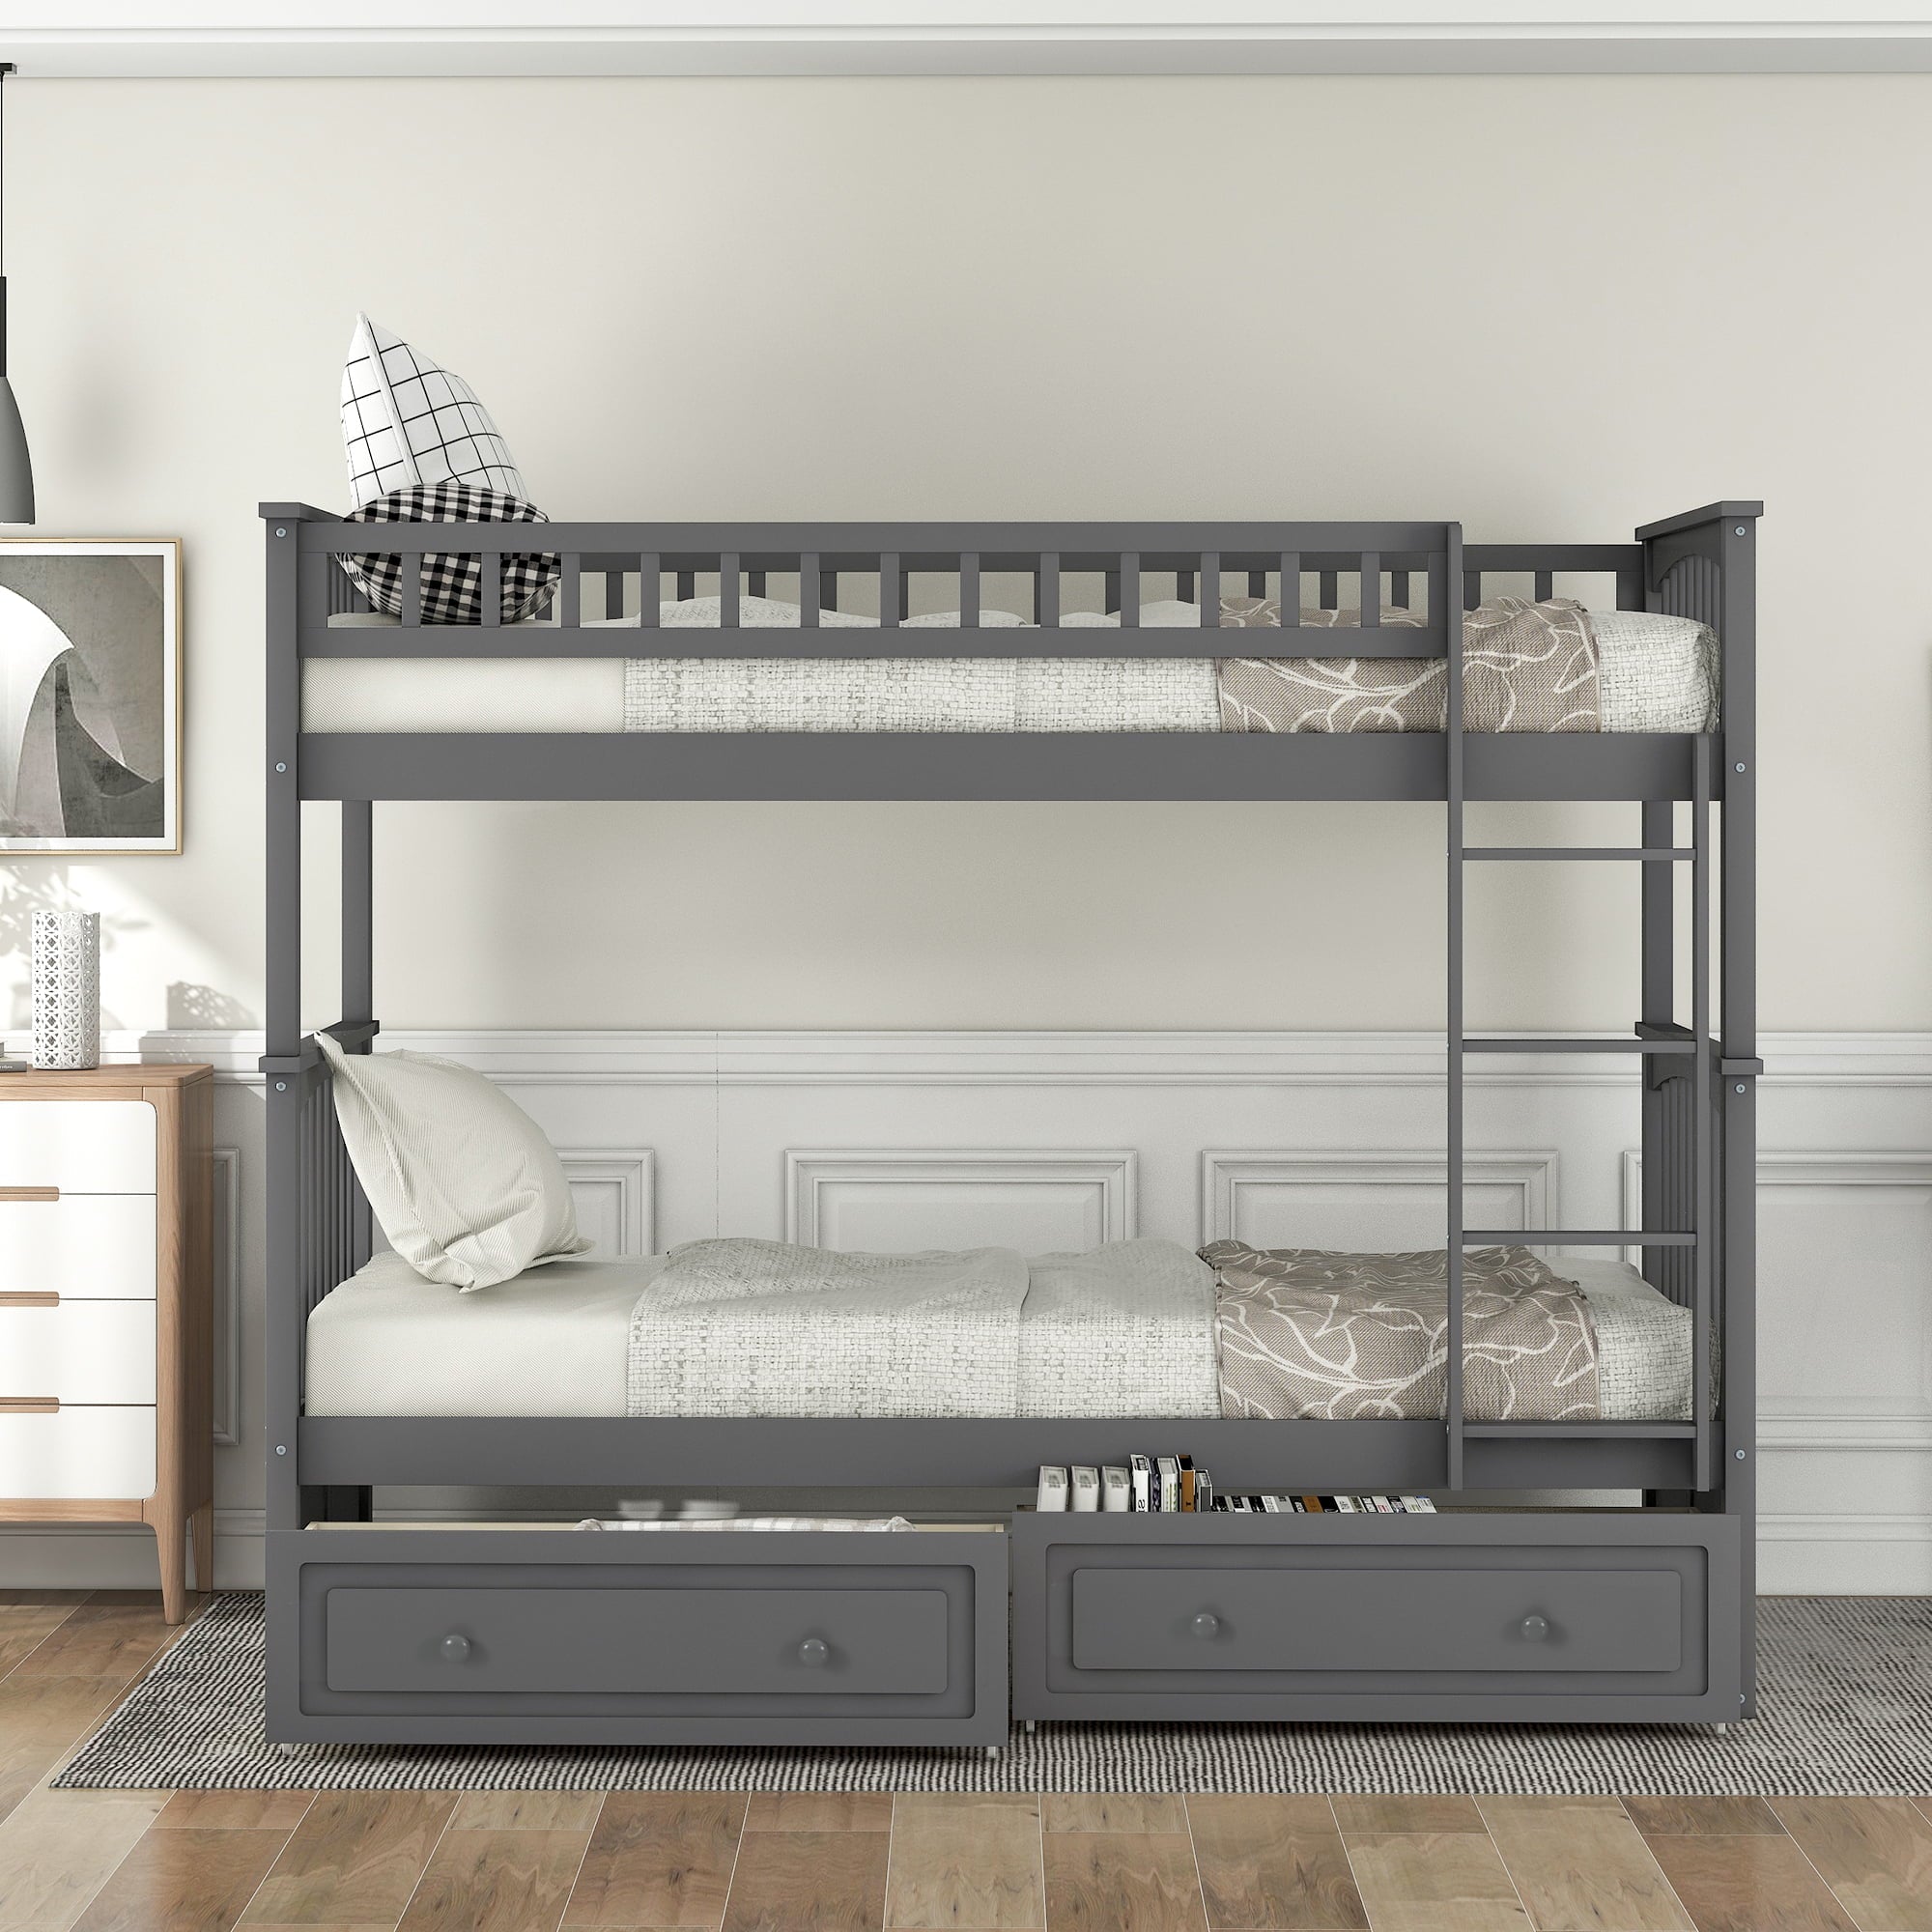 Euroco Pine Wood Bunk Bed With Storage, Twin-Over-Twin, Gray